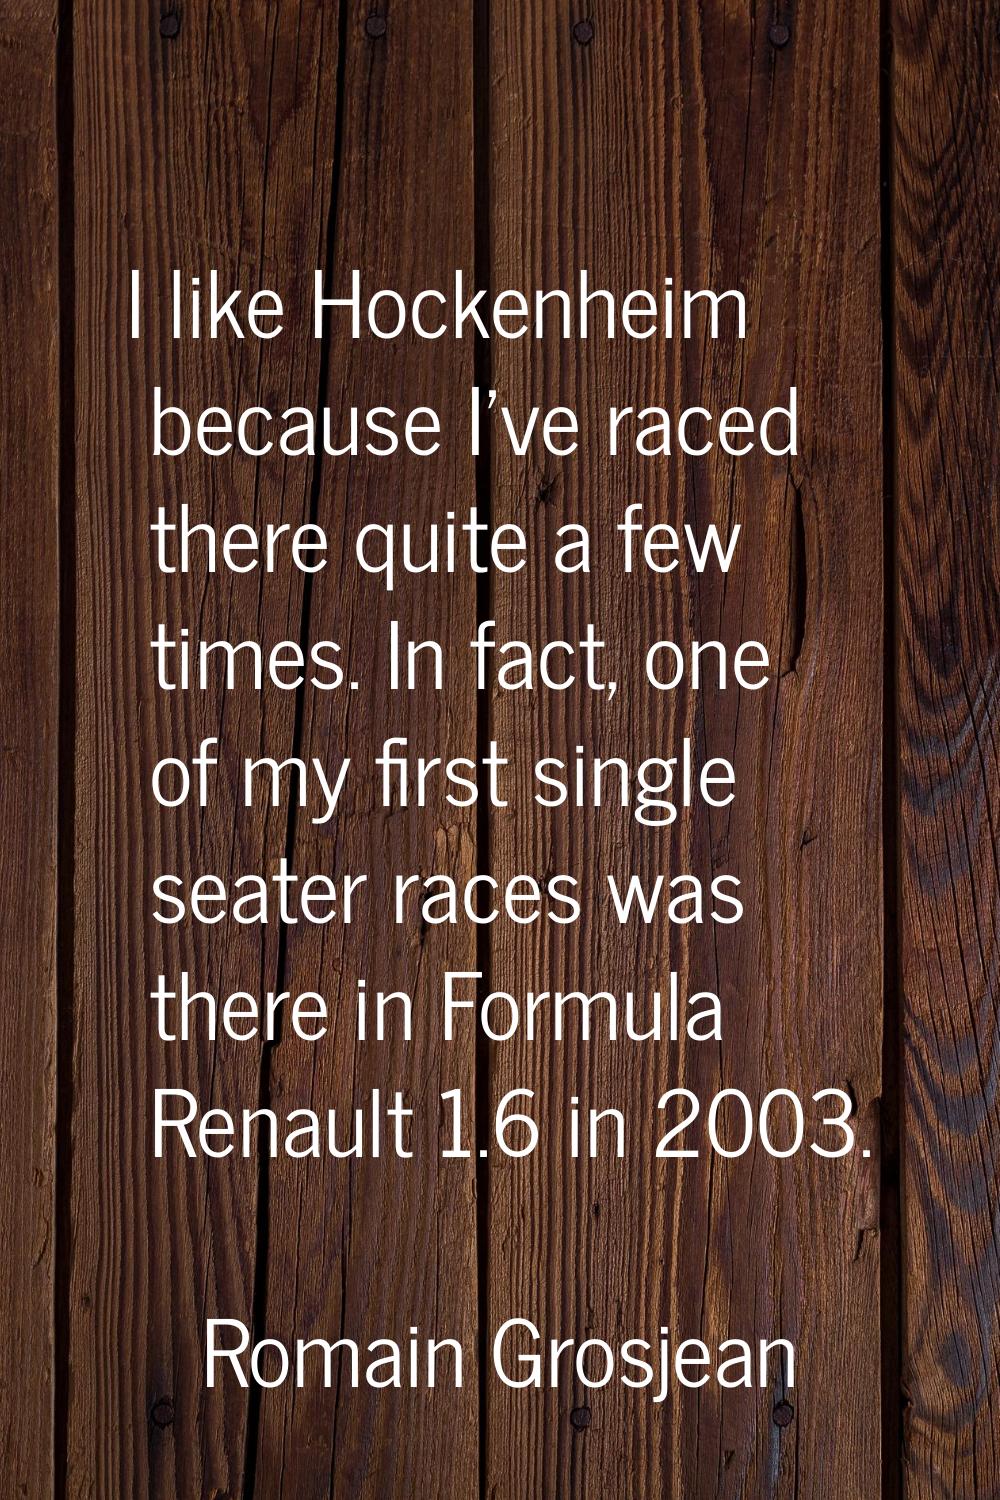 I like Hockenheim because I've raced there quite a few times. In fact, one of my first single seate